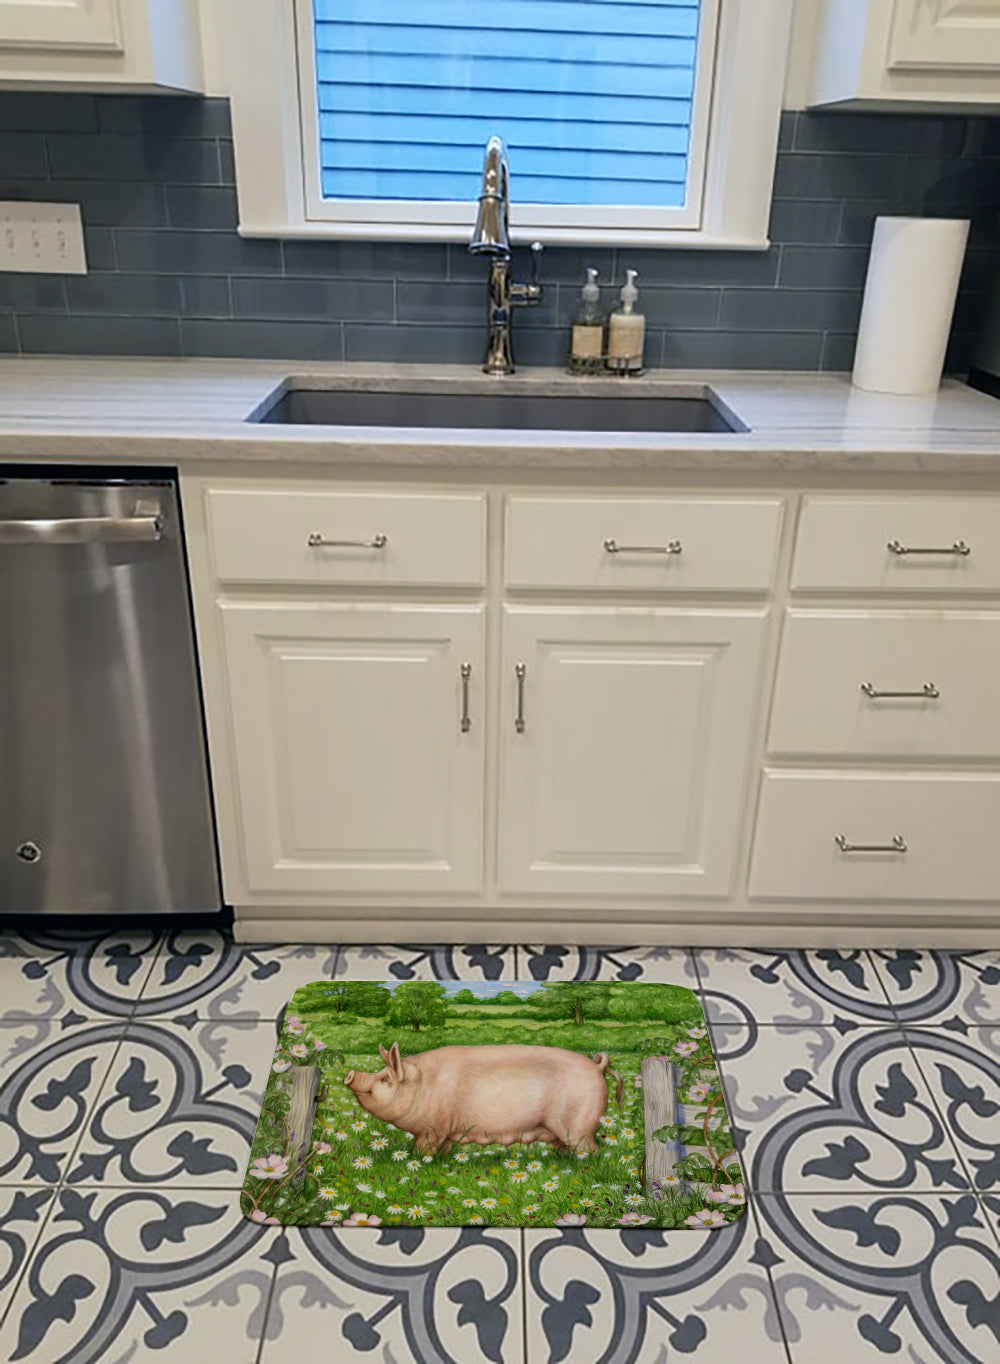 Pig In Dasies by Debbie Cook Machine Washable Memory Foam Mat CDCO0374RUG - the-store.com